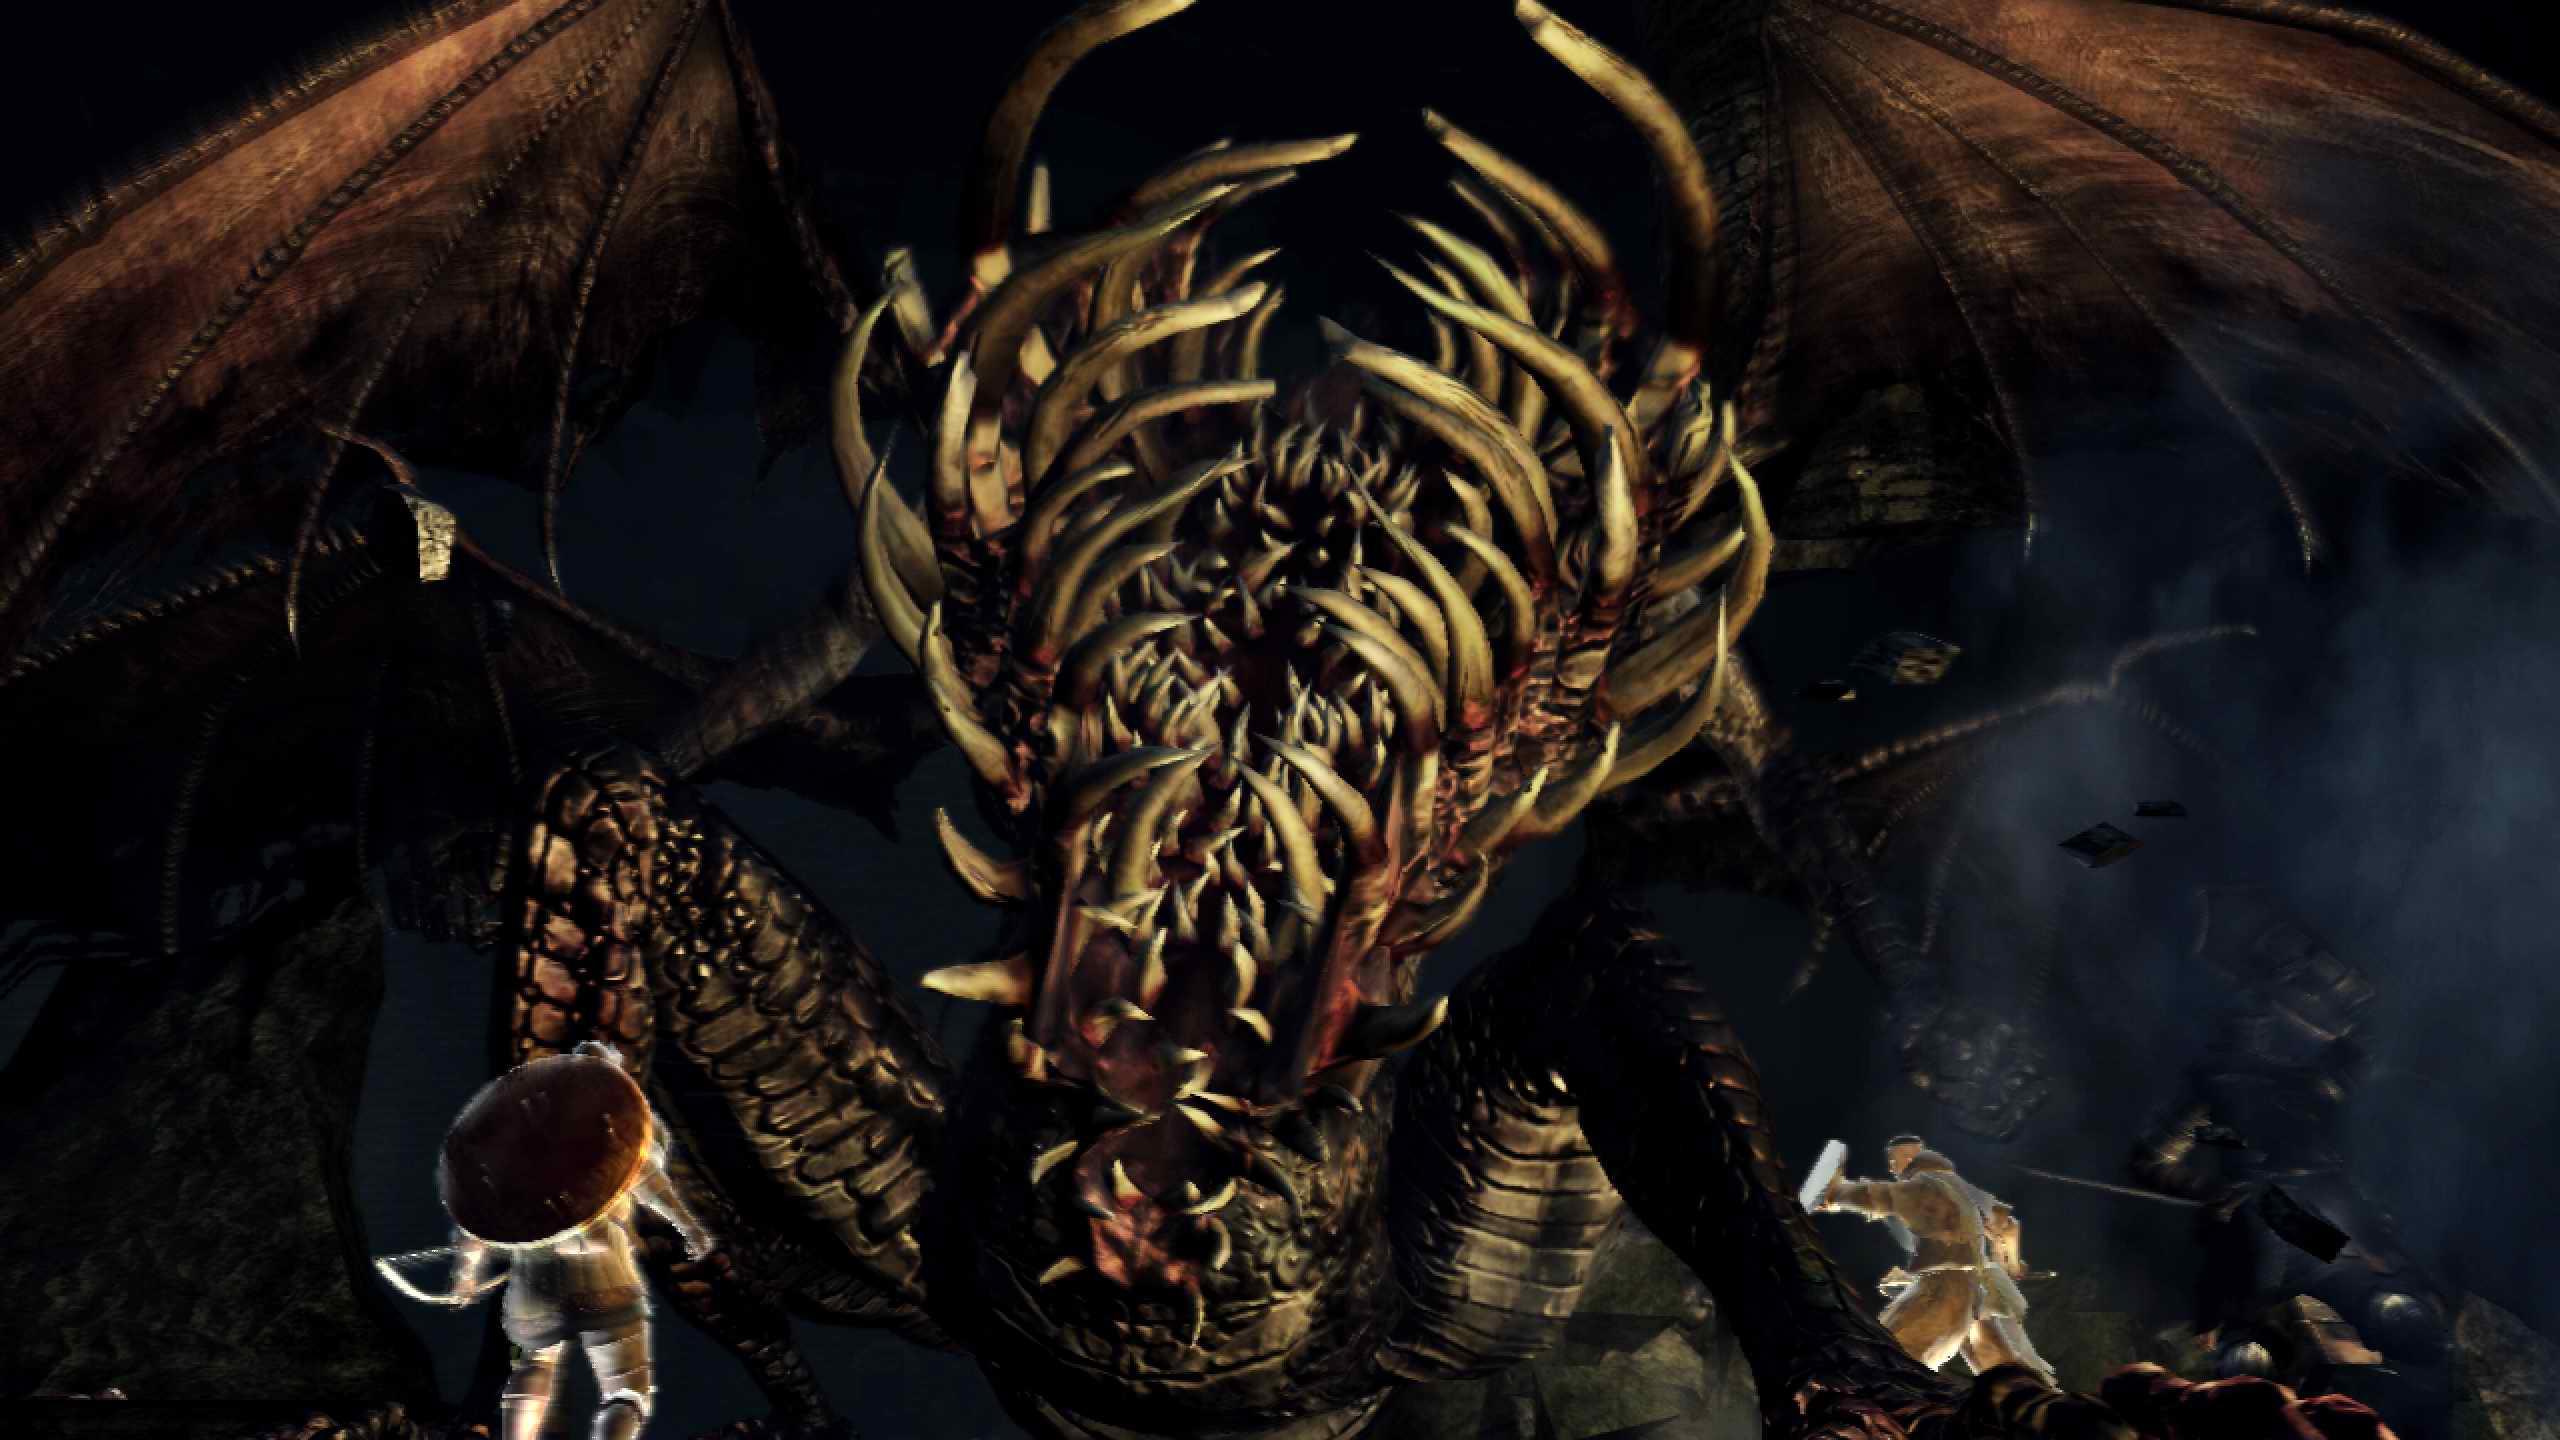 Demon's Souls boss guide to defeat them all